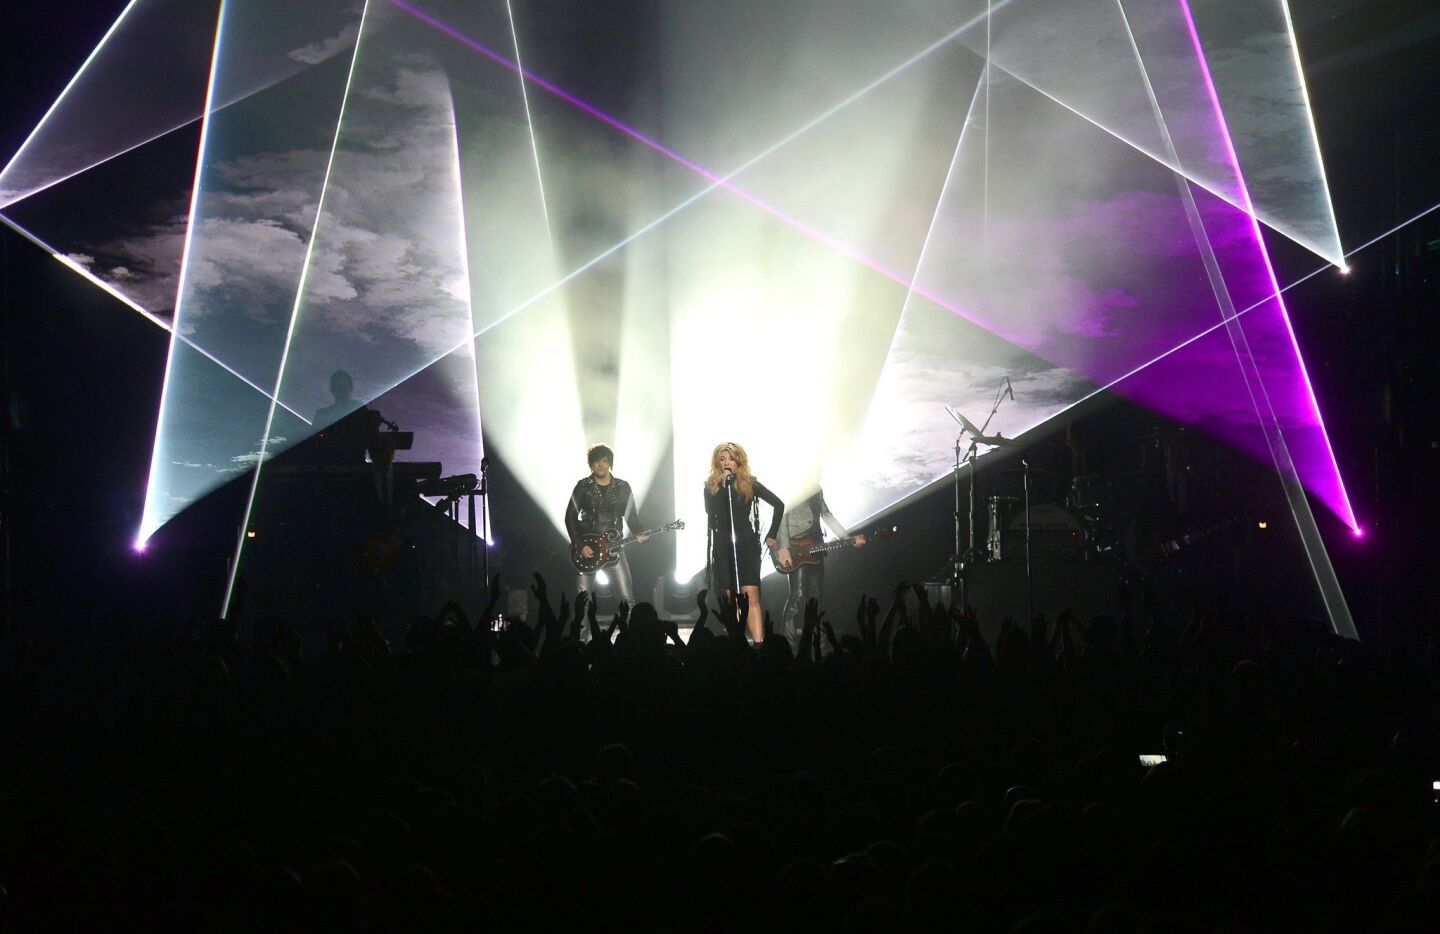 Singers Neil Perry, left, Kimberly Perry and Reid Perry of the Band Perry perform onstage during the 2013 Billboard Music Awards.